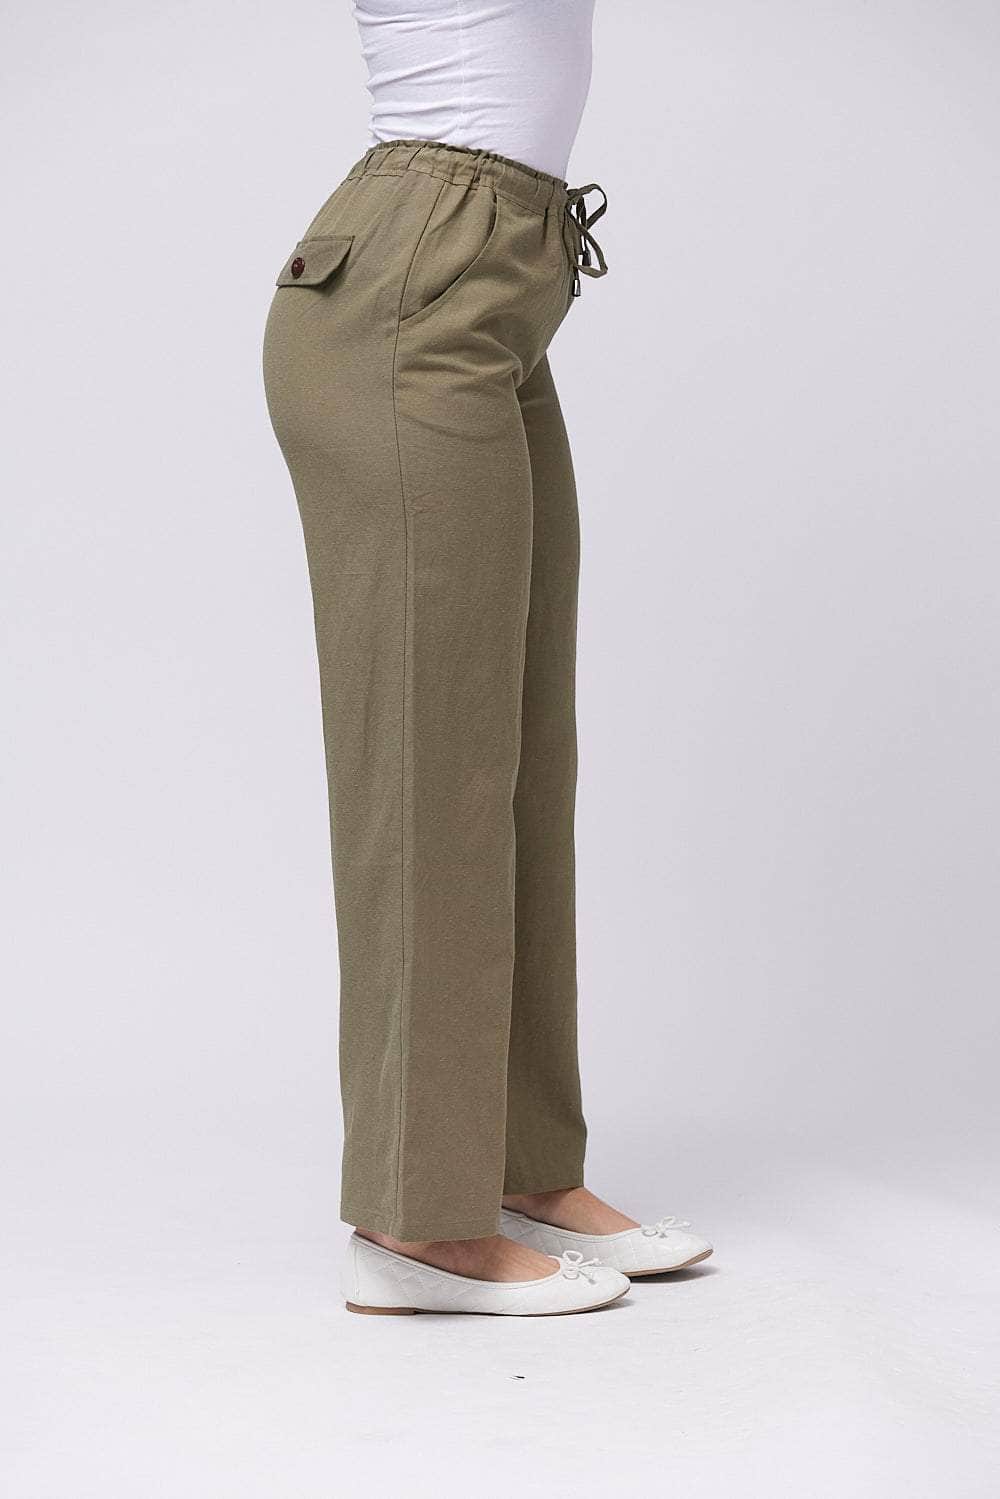 Saloos Trousers 7504-A